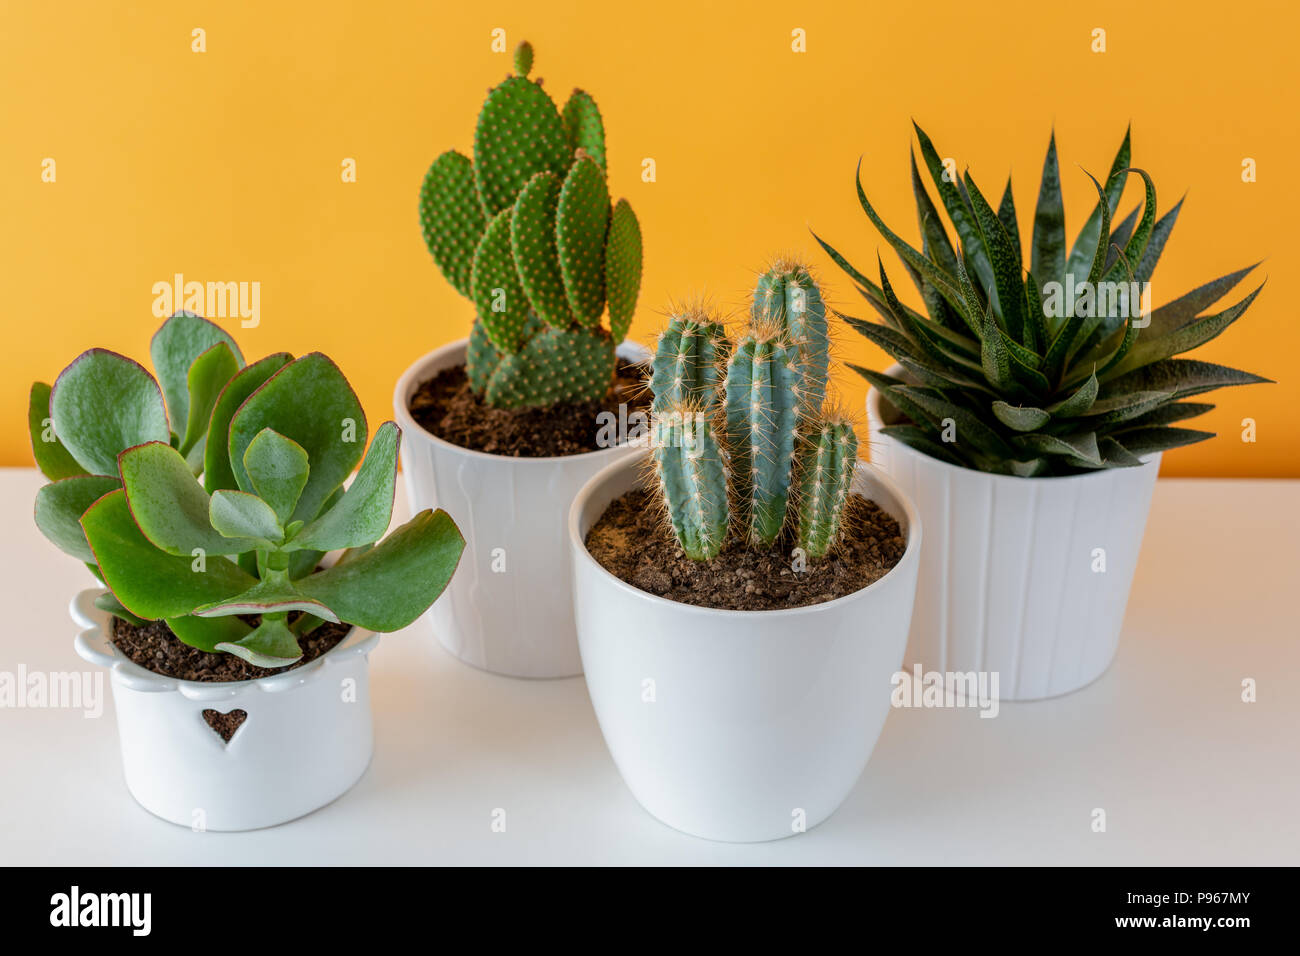 Collection of various cactus and succulent plants in different pots. Potted cactus house plants on white shelf against pastel mustard colored wall. Stock Photo